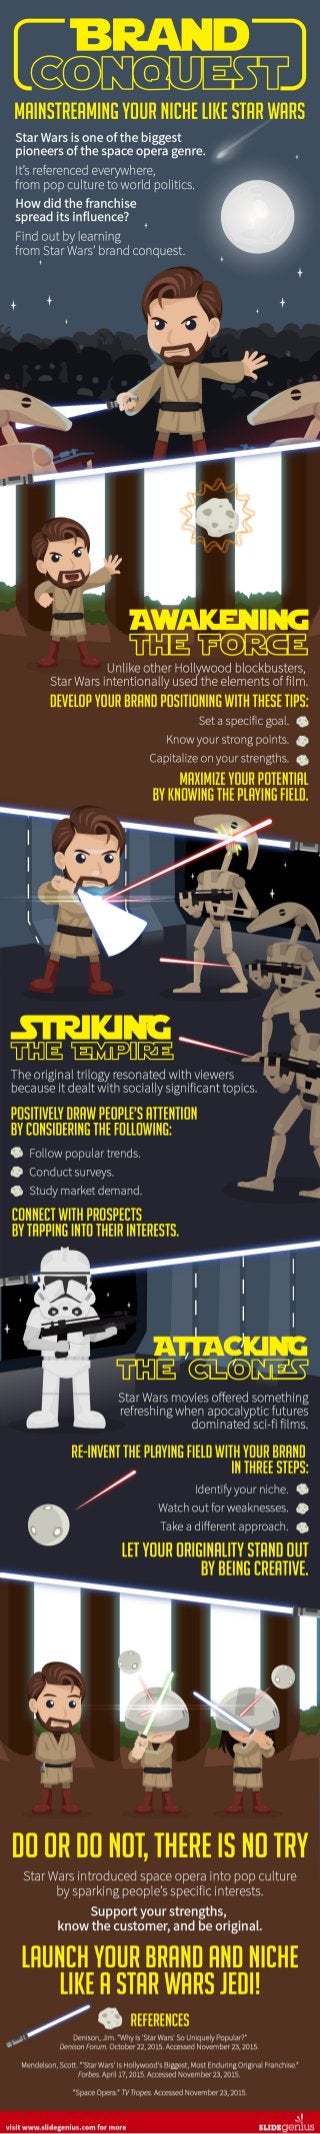 Brand Conquest: Mainstreaming Your Niche Like Star Wars